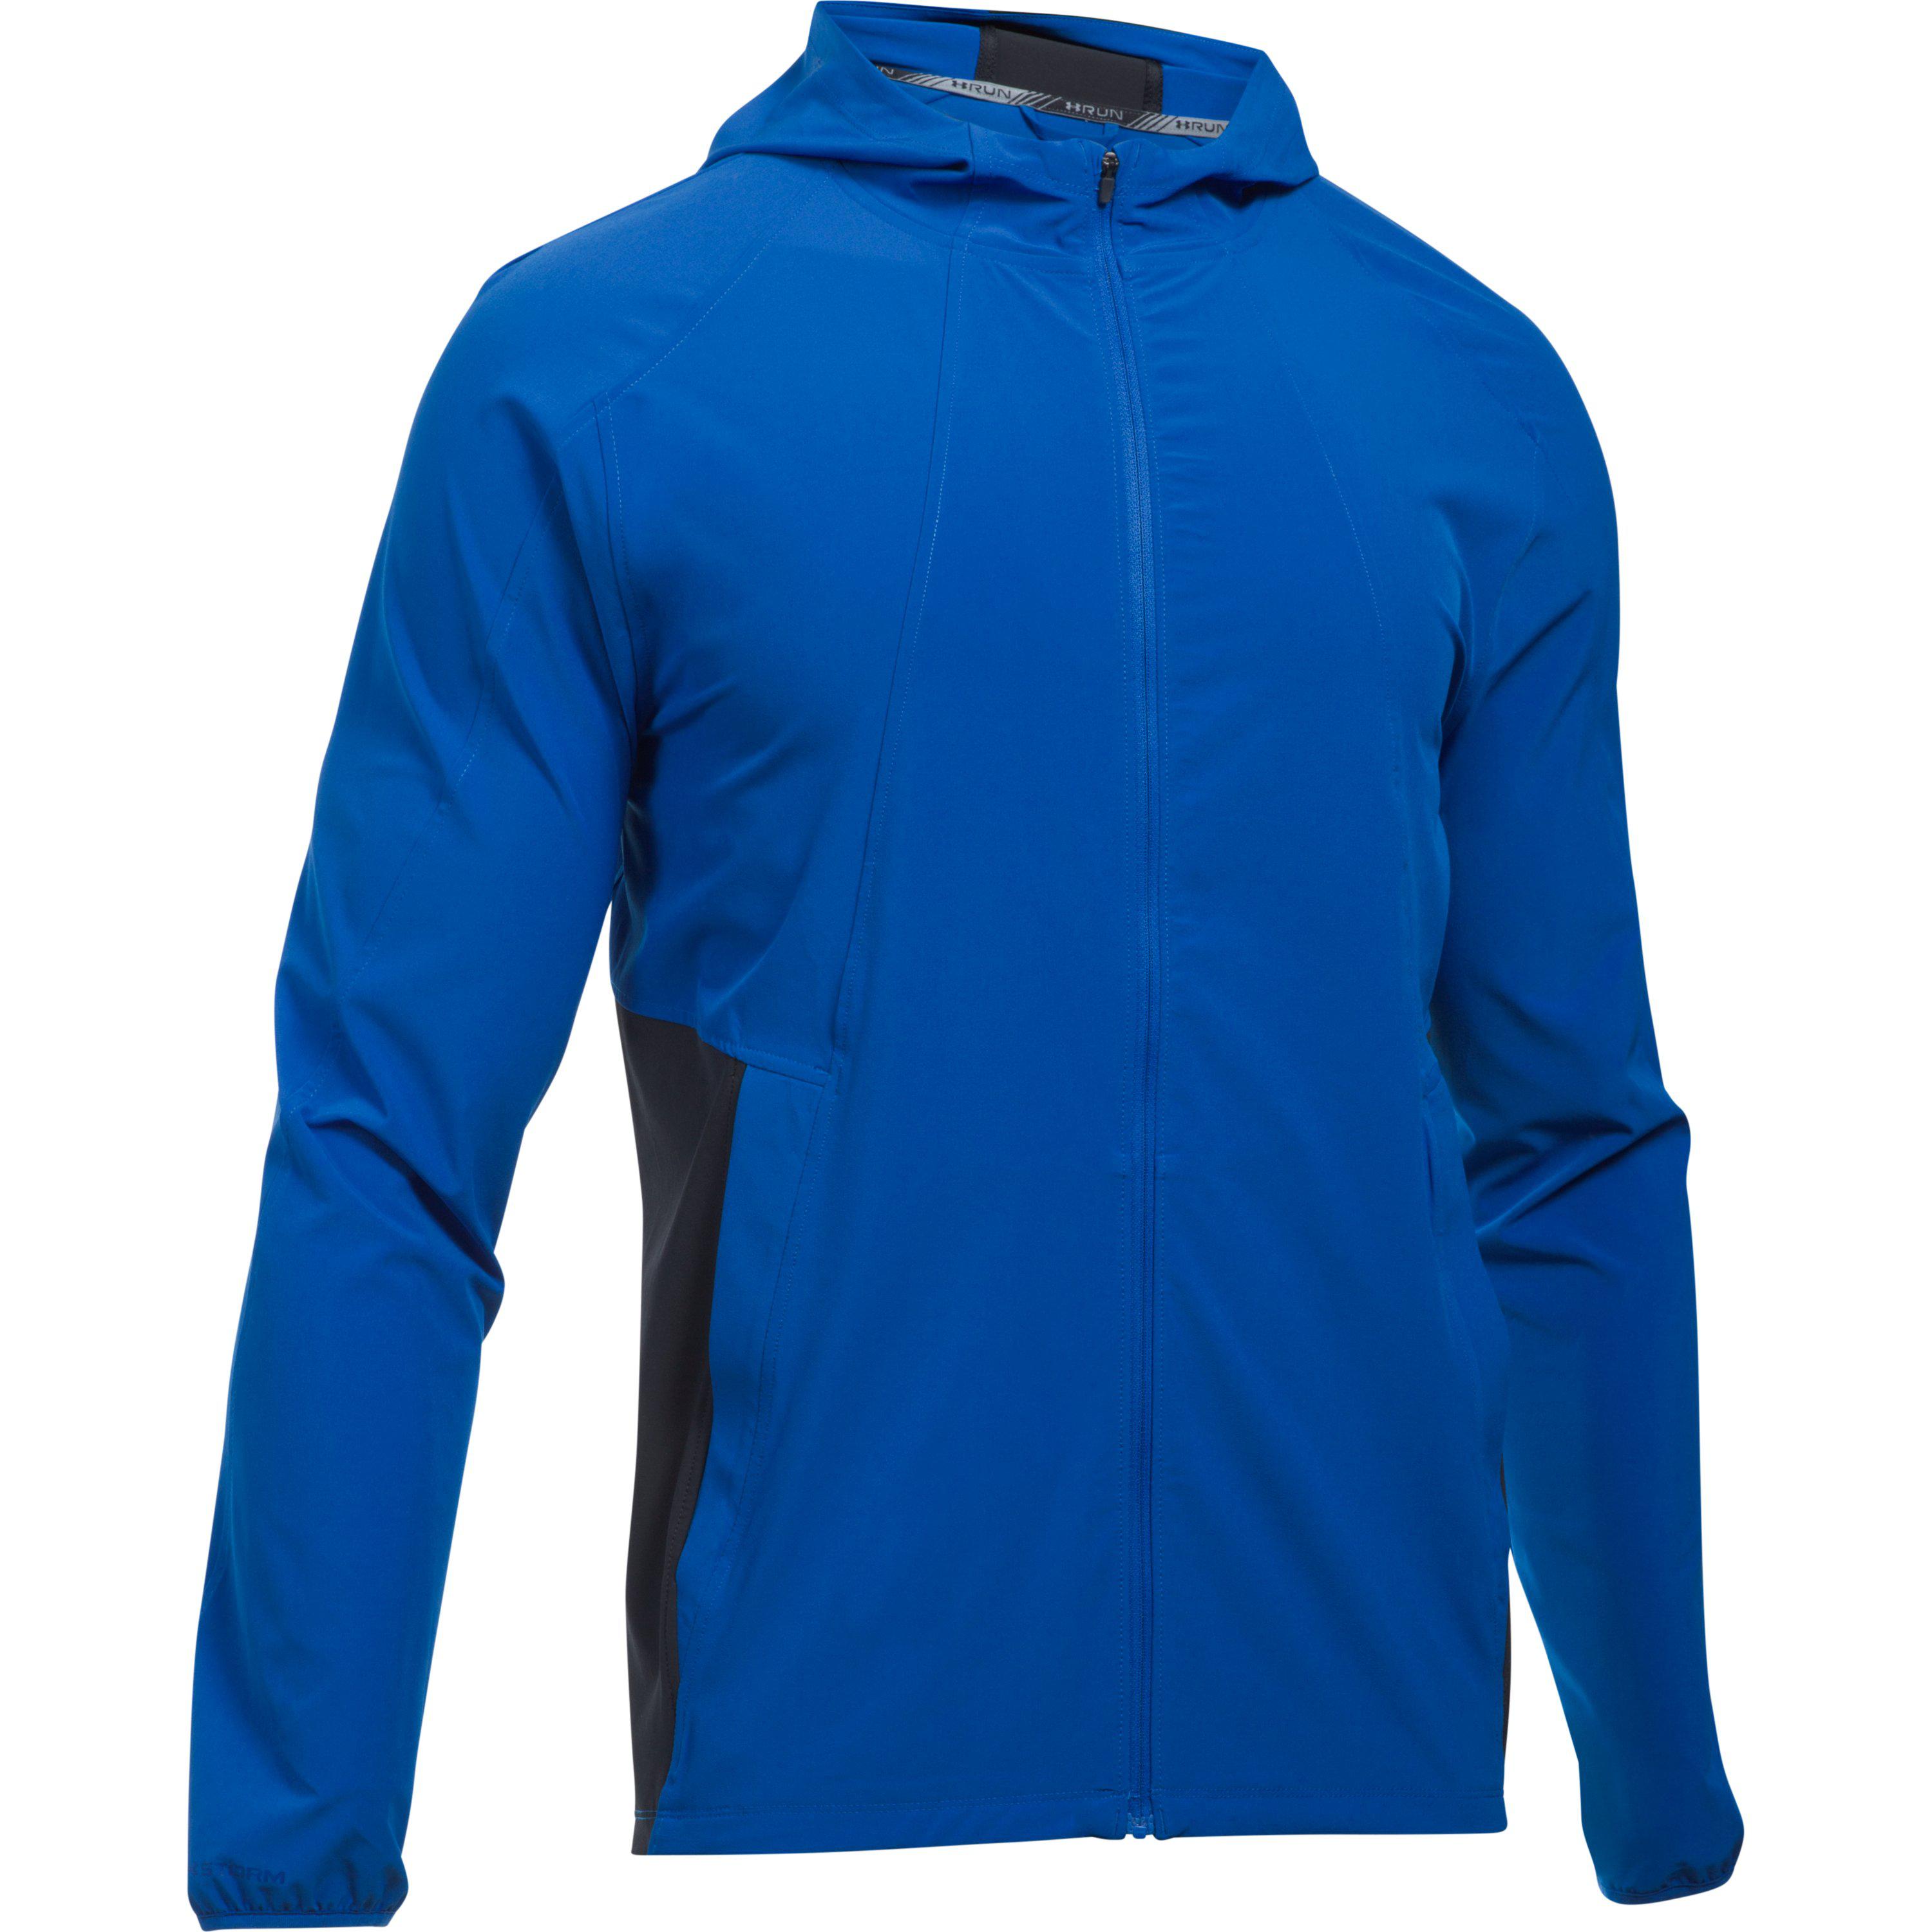 Under Armour Men's Ua Outrun The Storm Jacket in Blue for Men - Lyst